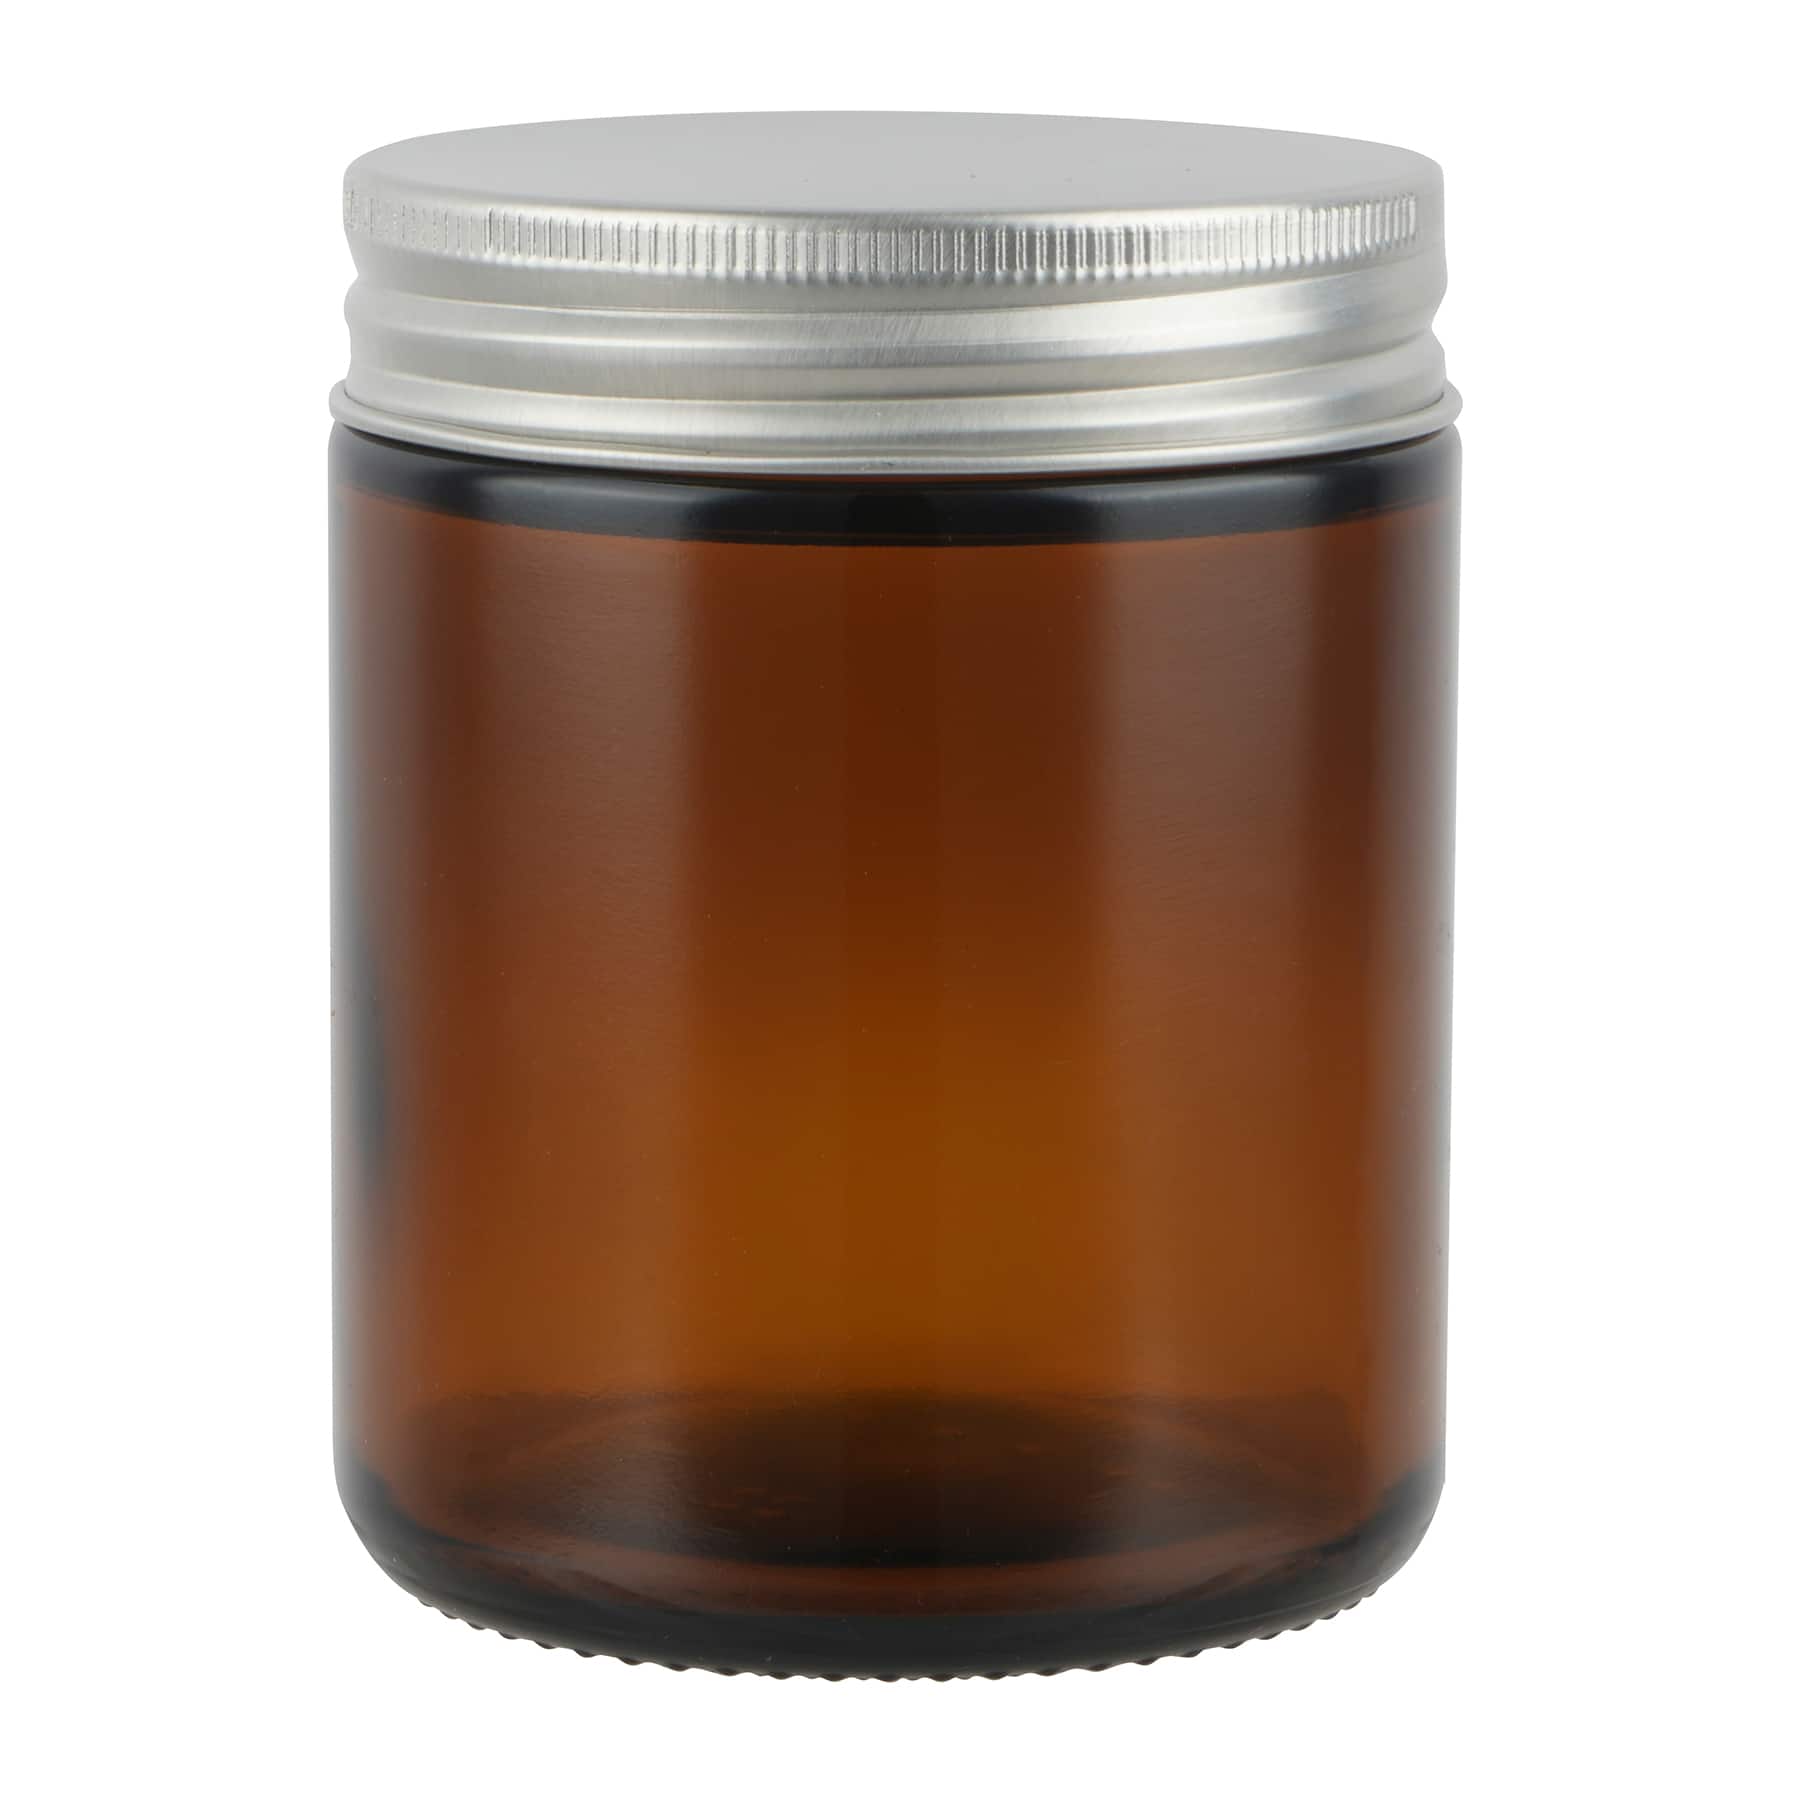 8oz. Amber Glass Candle Jars, 2ct. by Make Market&#xAE;